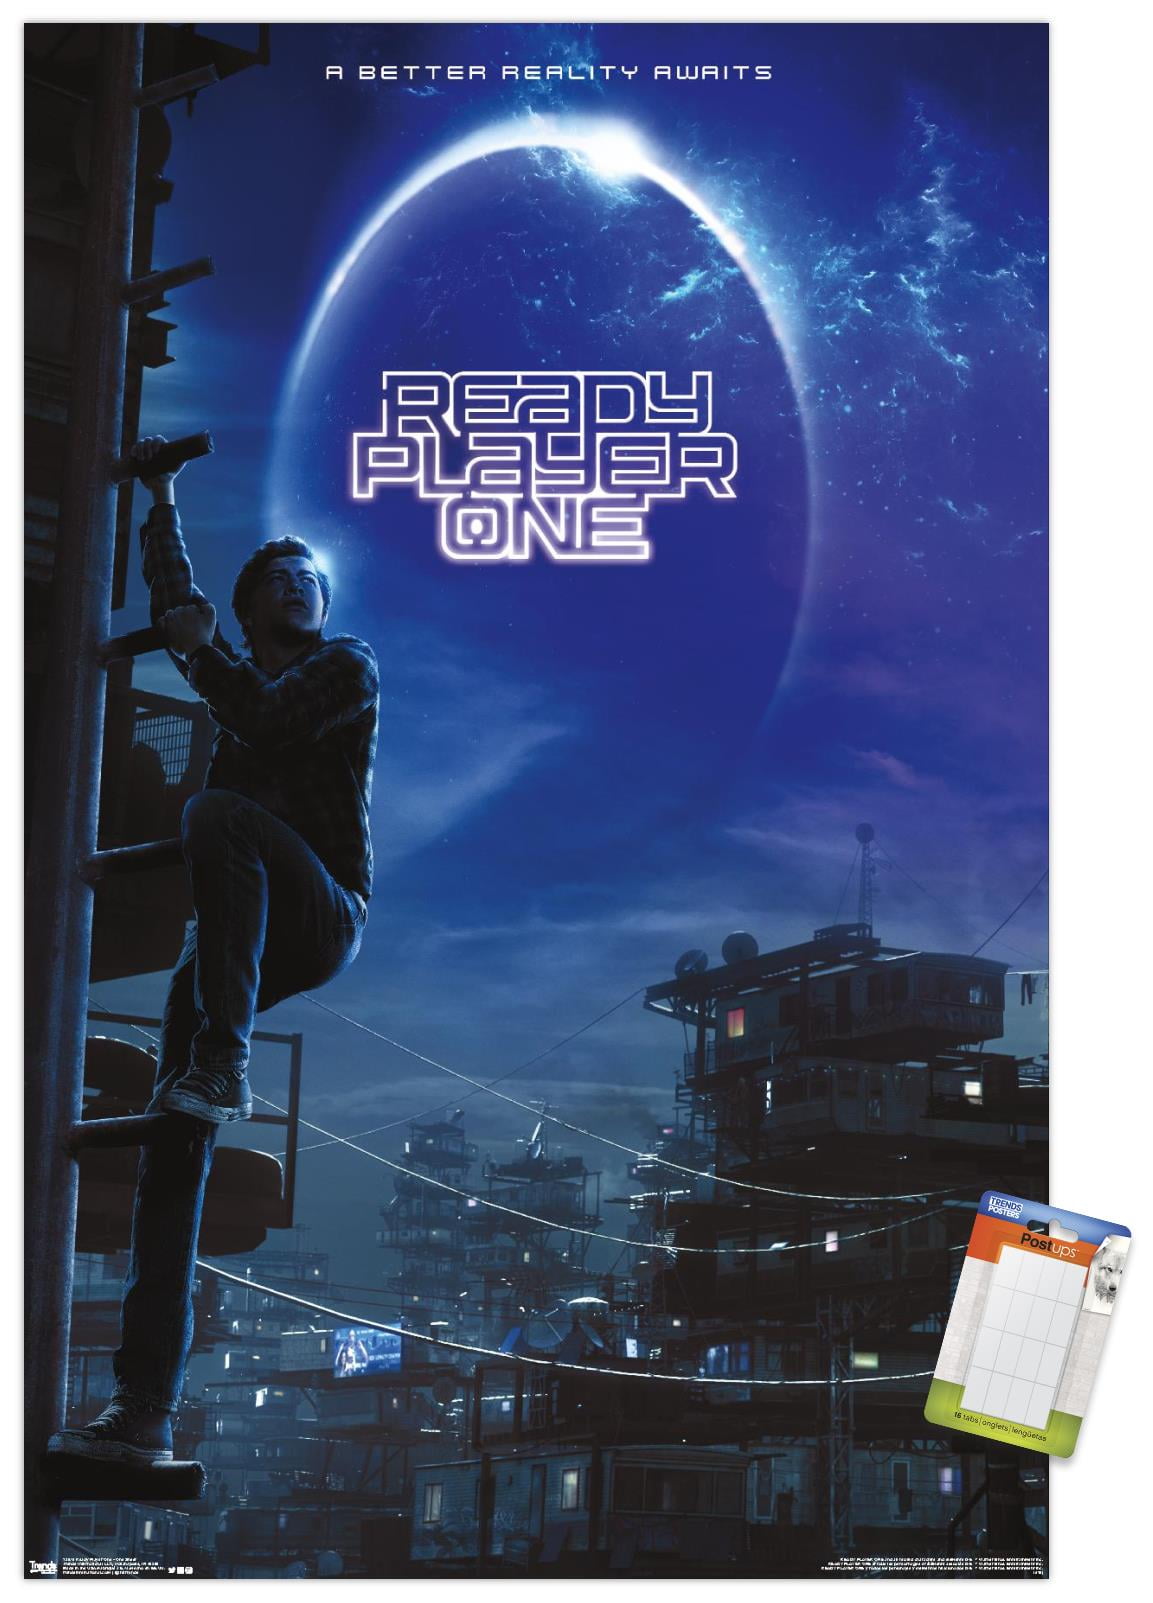 Ready Player One poster ridiculed for bad Photoshop, turns out to be  accurate